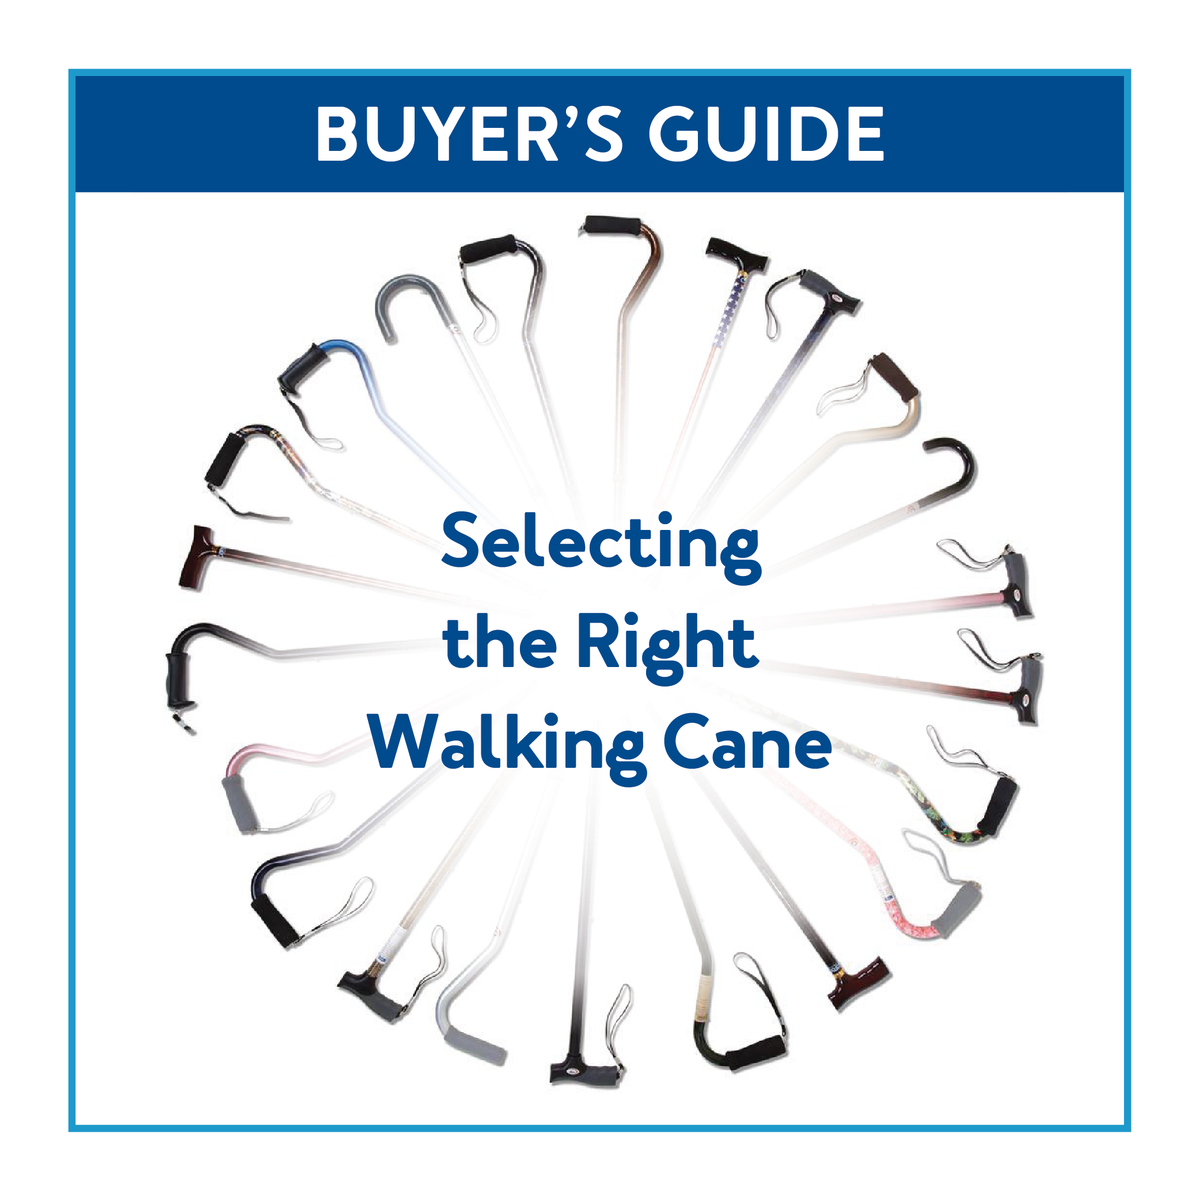 Various walking canes arranged in a circle surrounded by a blue border with text “Buyer’s Guide: Selecting the Right Walking Cane”